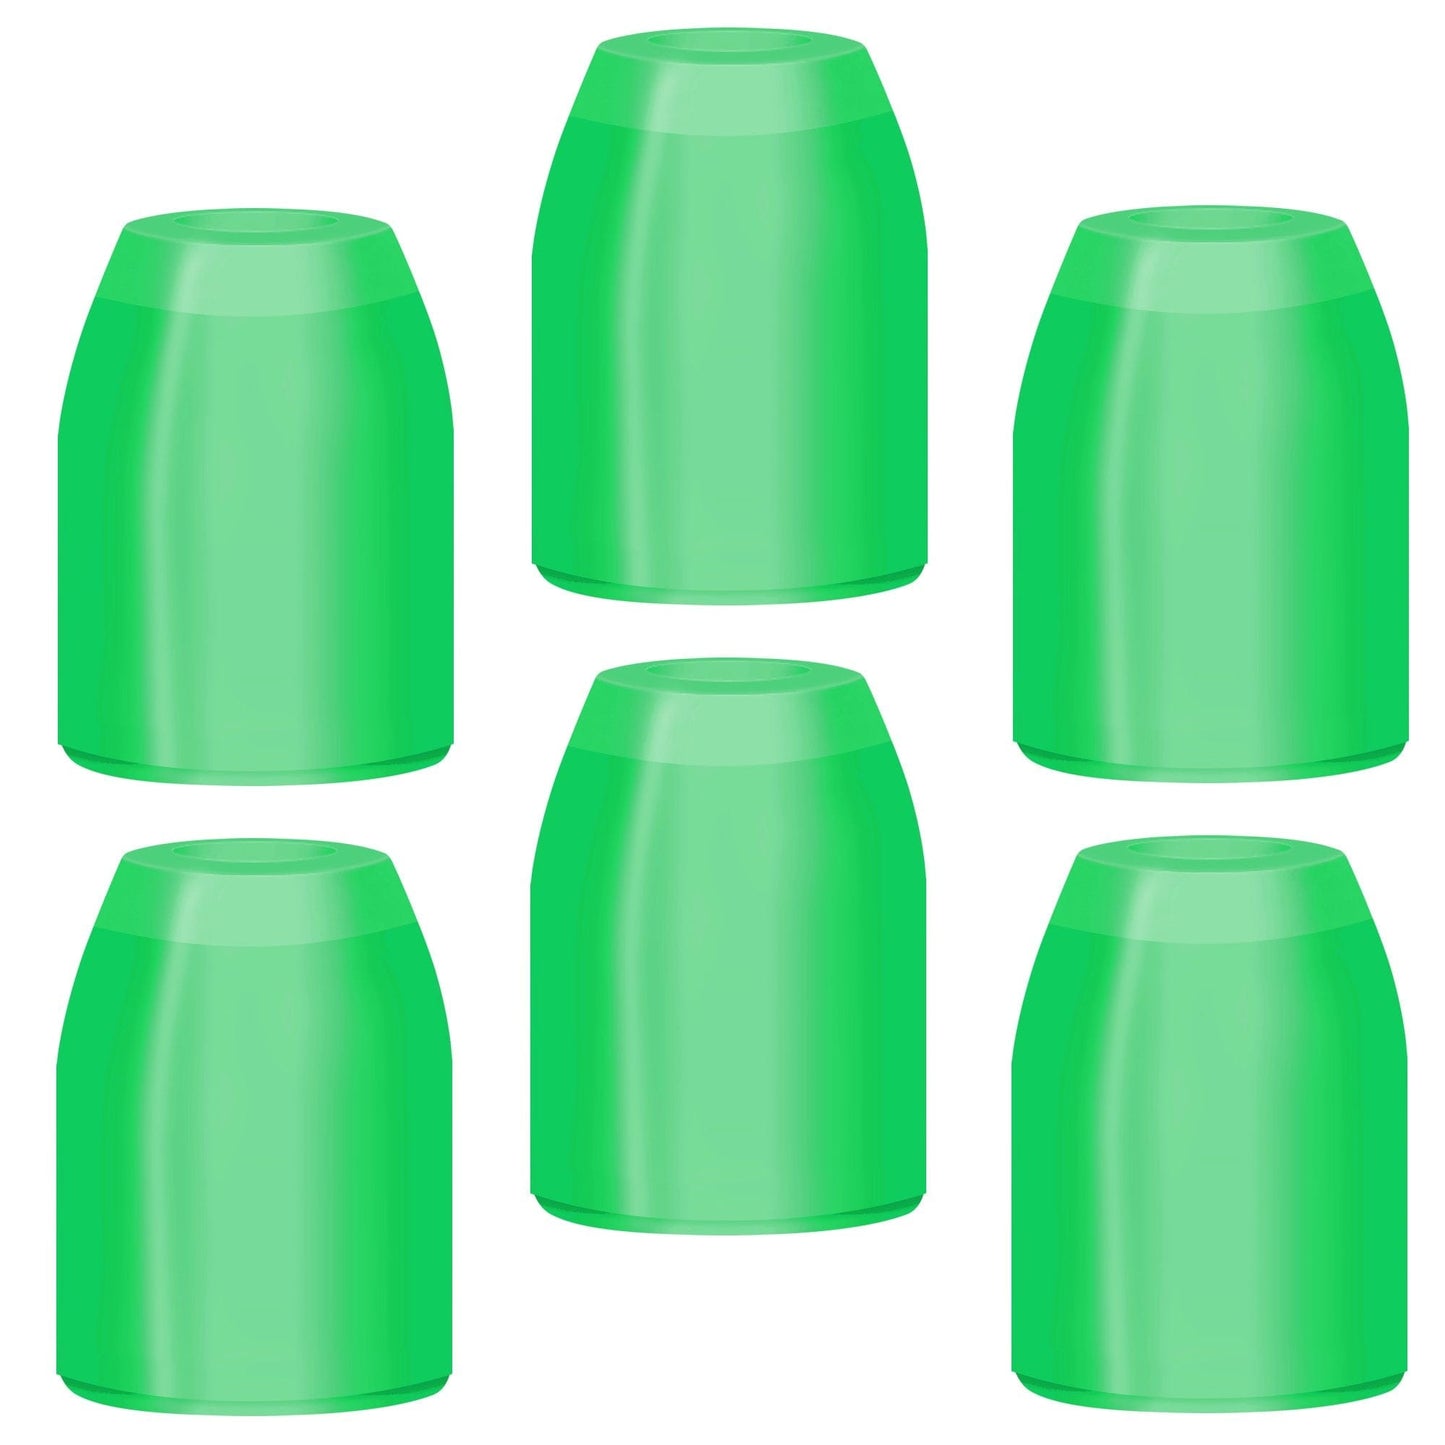 L-Style - Standard Champagne Rings - Pack 6 Green